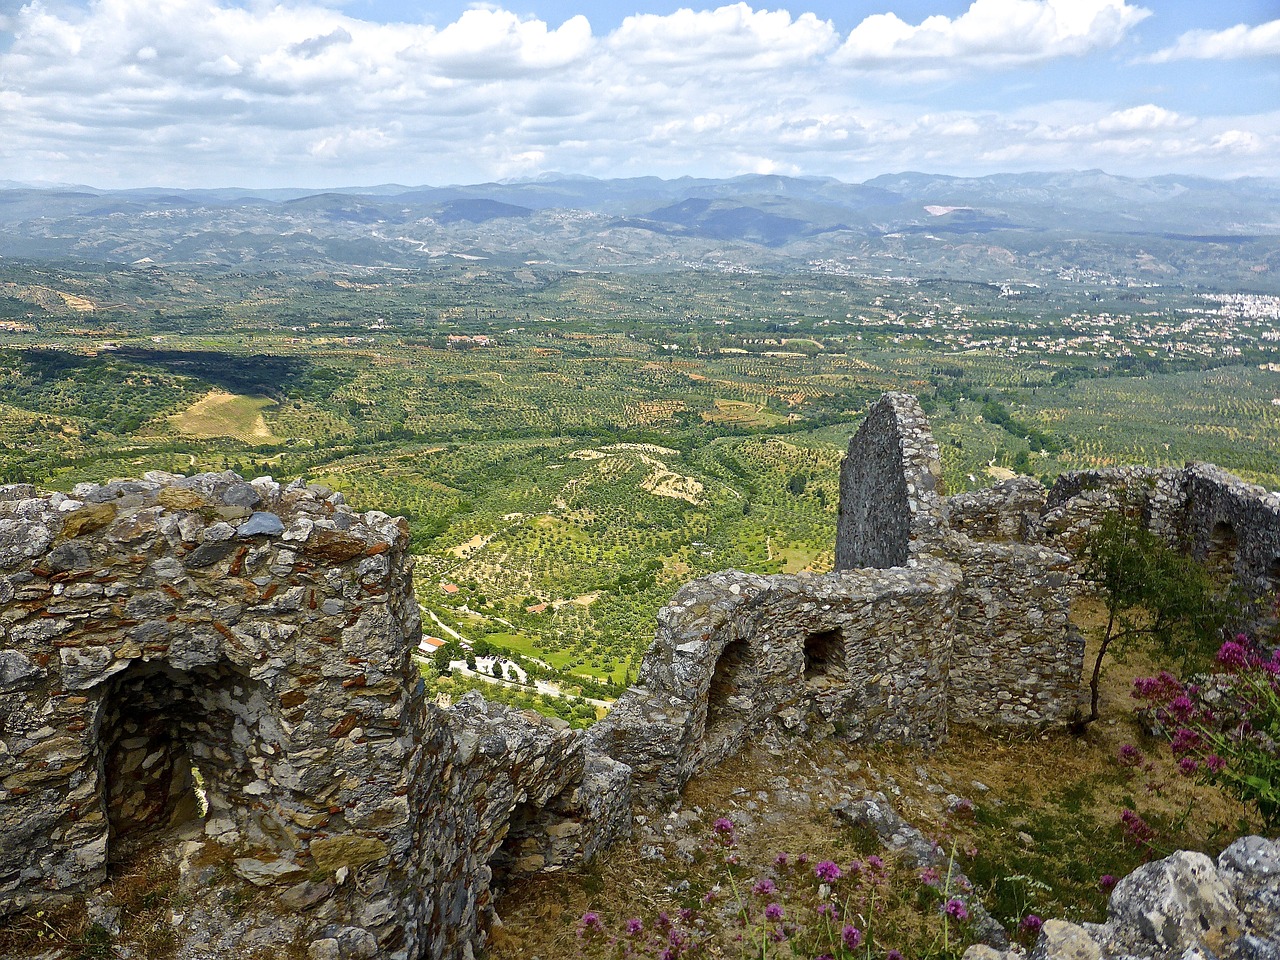 The ruined Byzantine city of Mystras sits on the top and the slopes of a hill that juts out from the plain and is one of the most remarkable places in Greece.